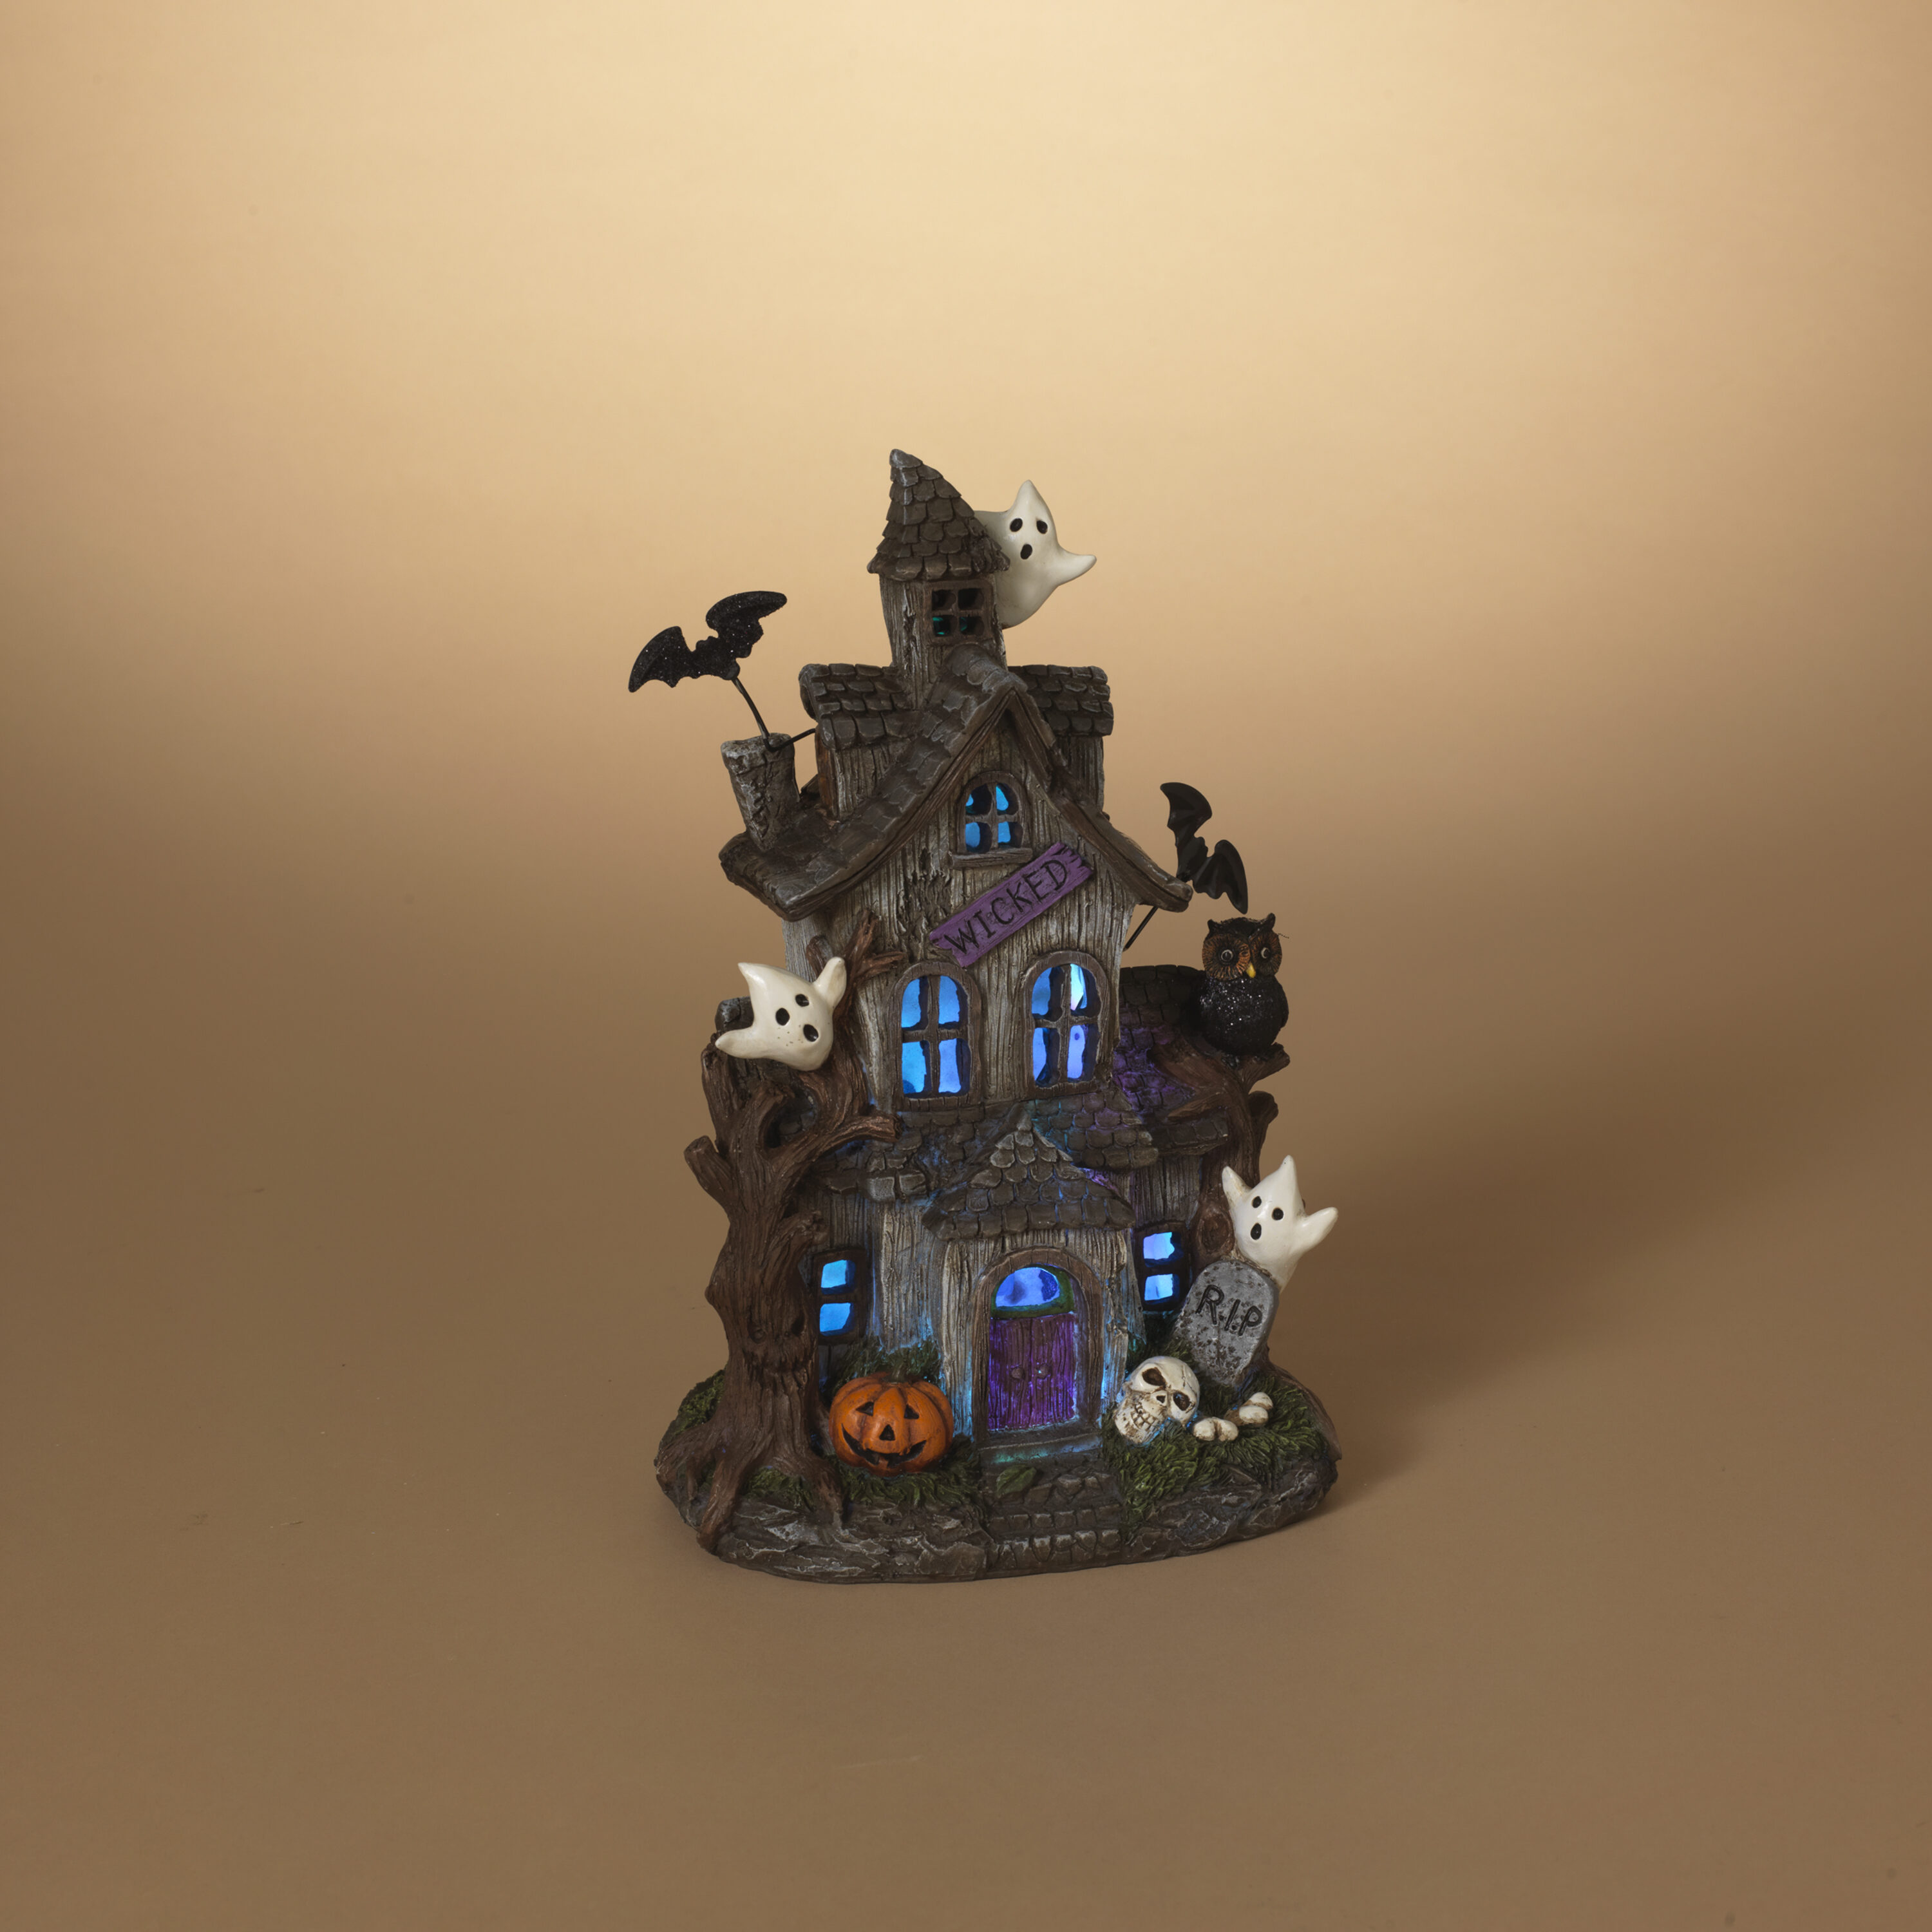 GIL 11.6-in Tabletop Lighted Haunted House Figurine in the Halloween ...